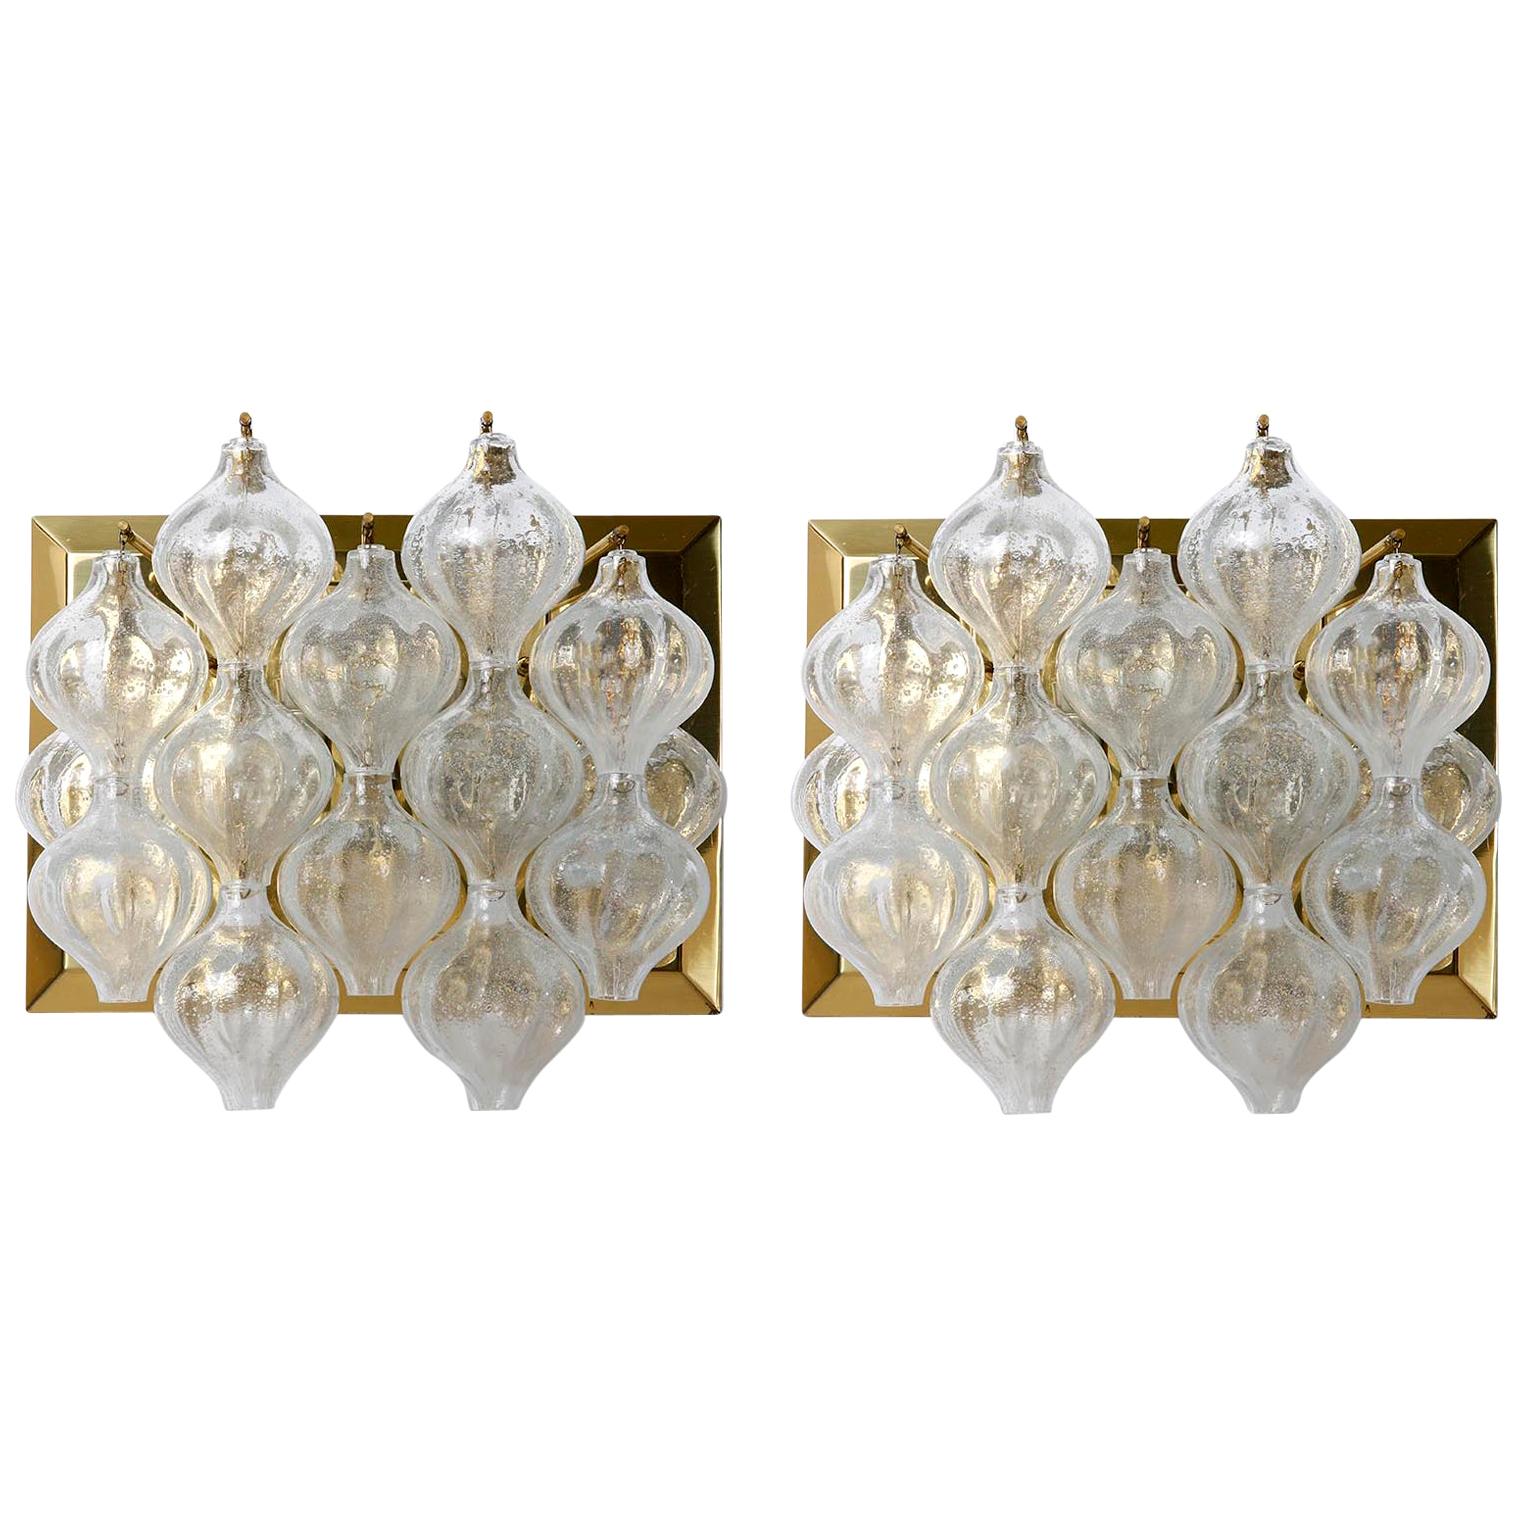 Pair of Large Kalmar 'Tulipan' Wall Lights Sconces, Glass Brass, 1960s For Sale